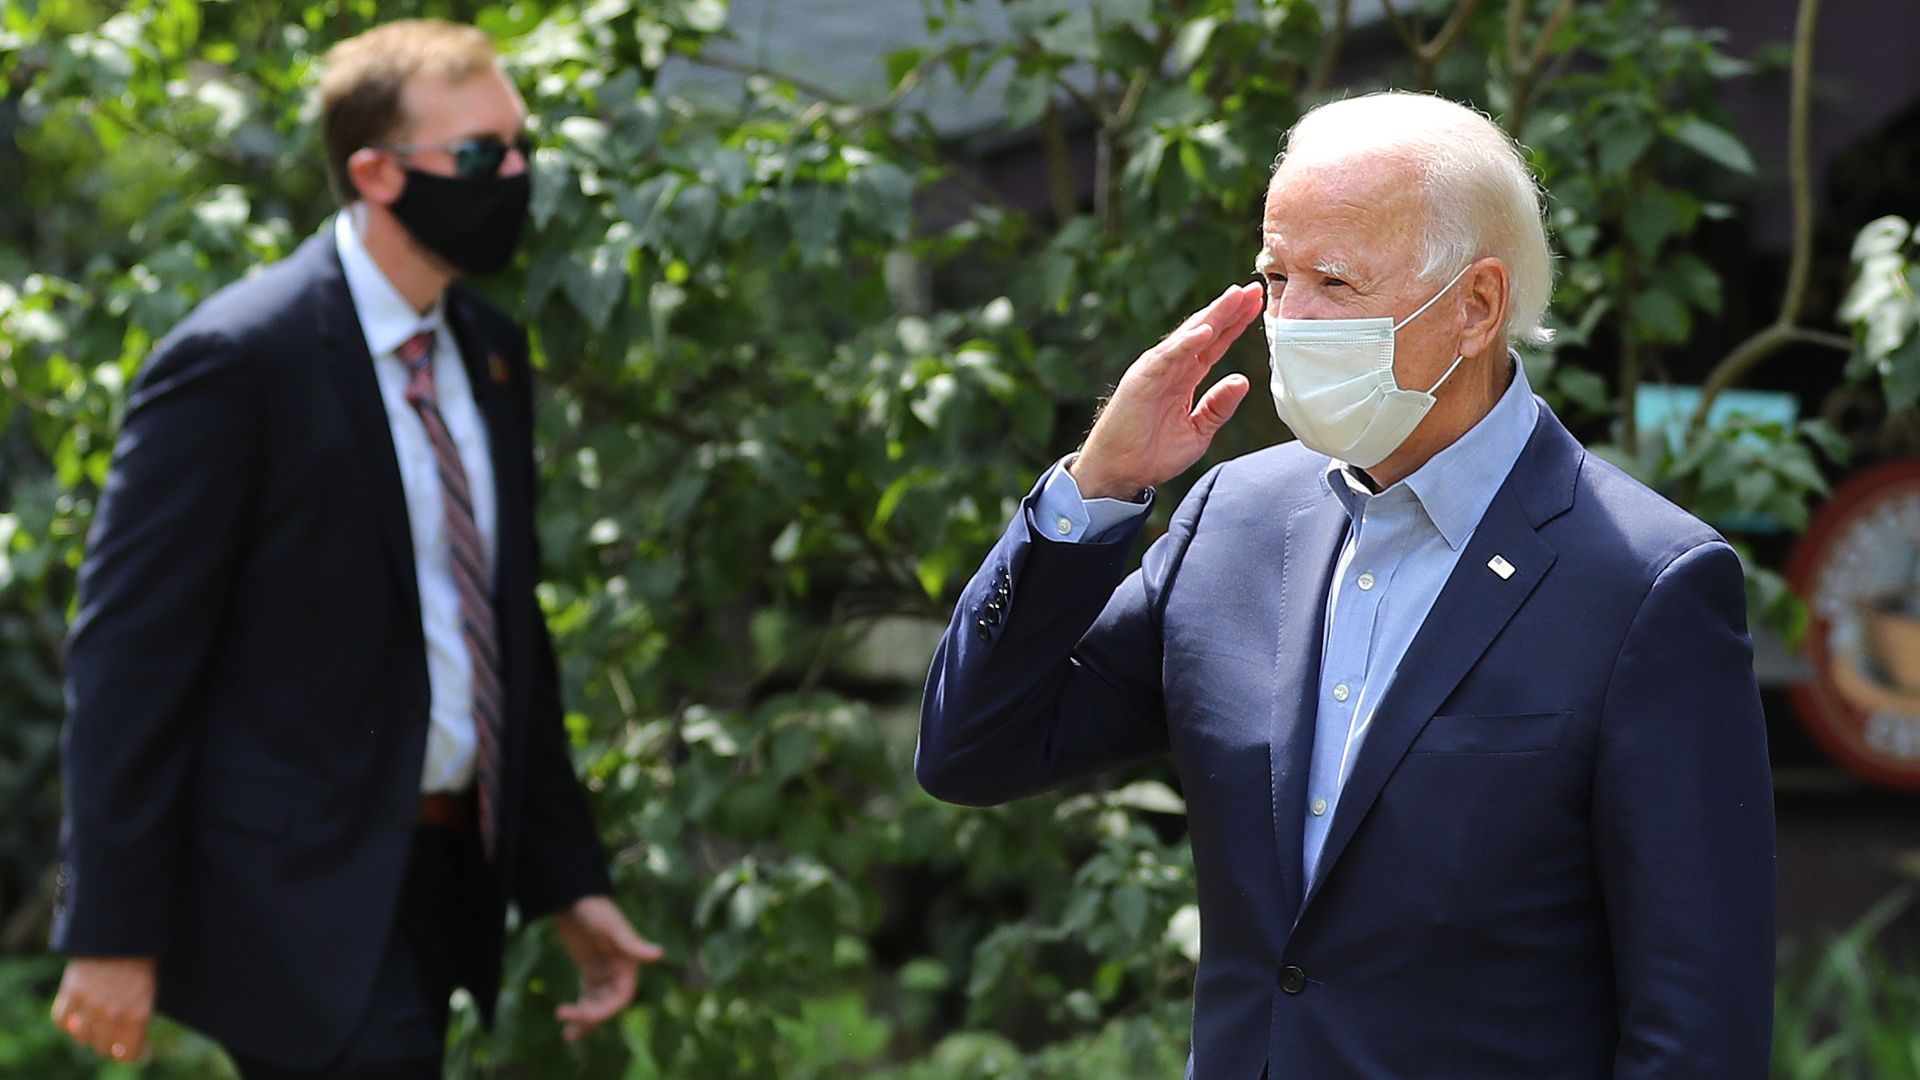 Democratic presidential nominee Joe Biden salutes as he arrives for a meeting with veterans and union leaders in the backyard of a supporter on Labor Day September 07, 2020 in Lancaster, Pennsylvania